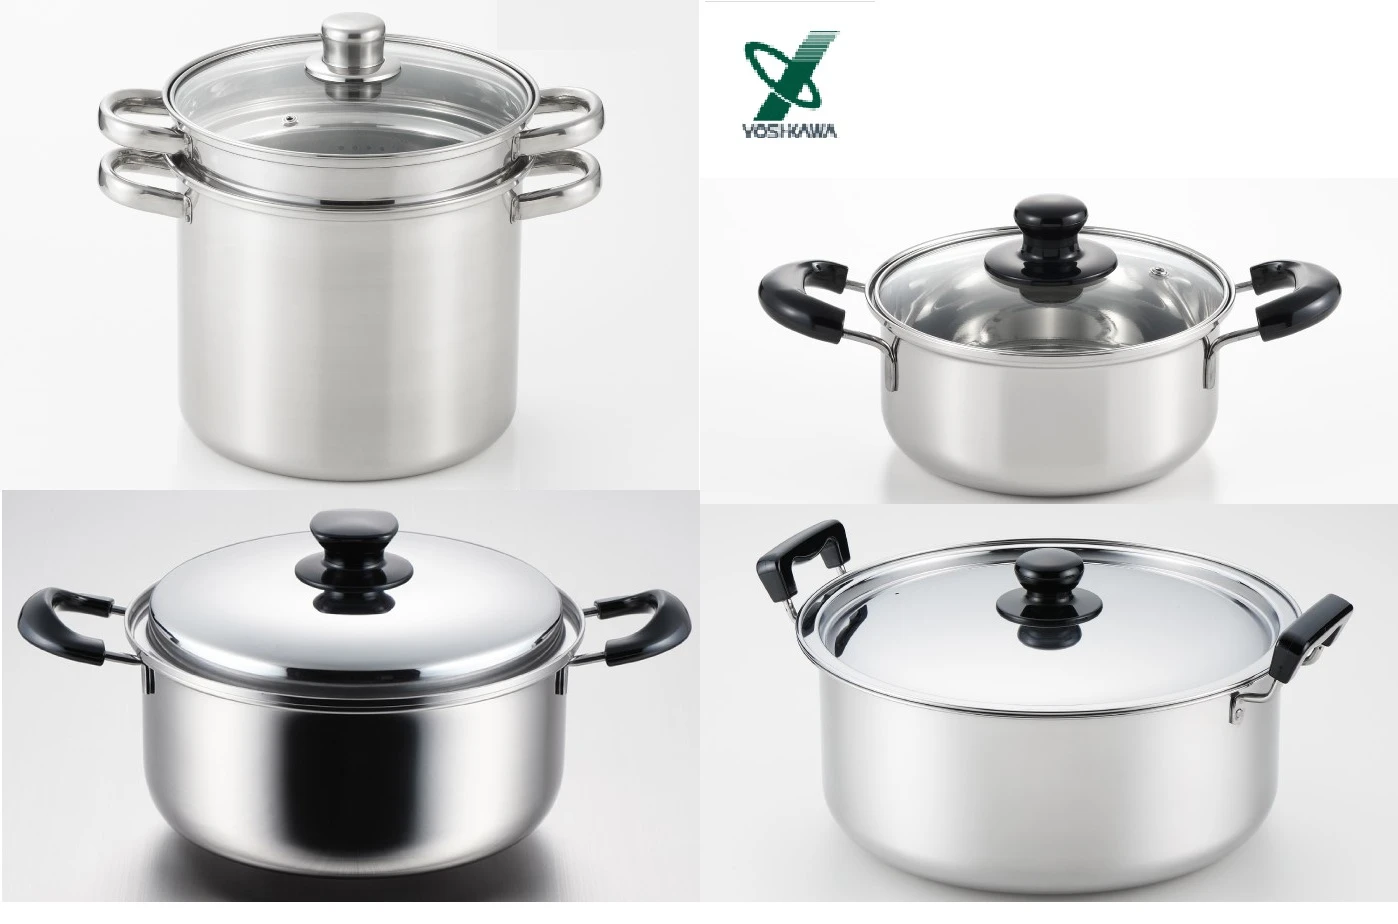 Double-handle copper milk heating stew cooking pot made in Japan